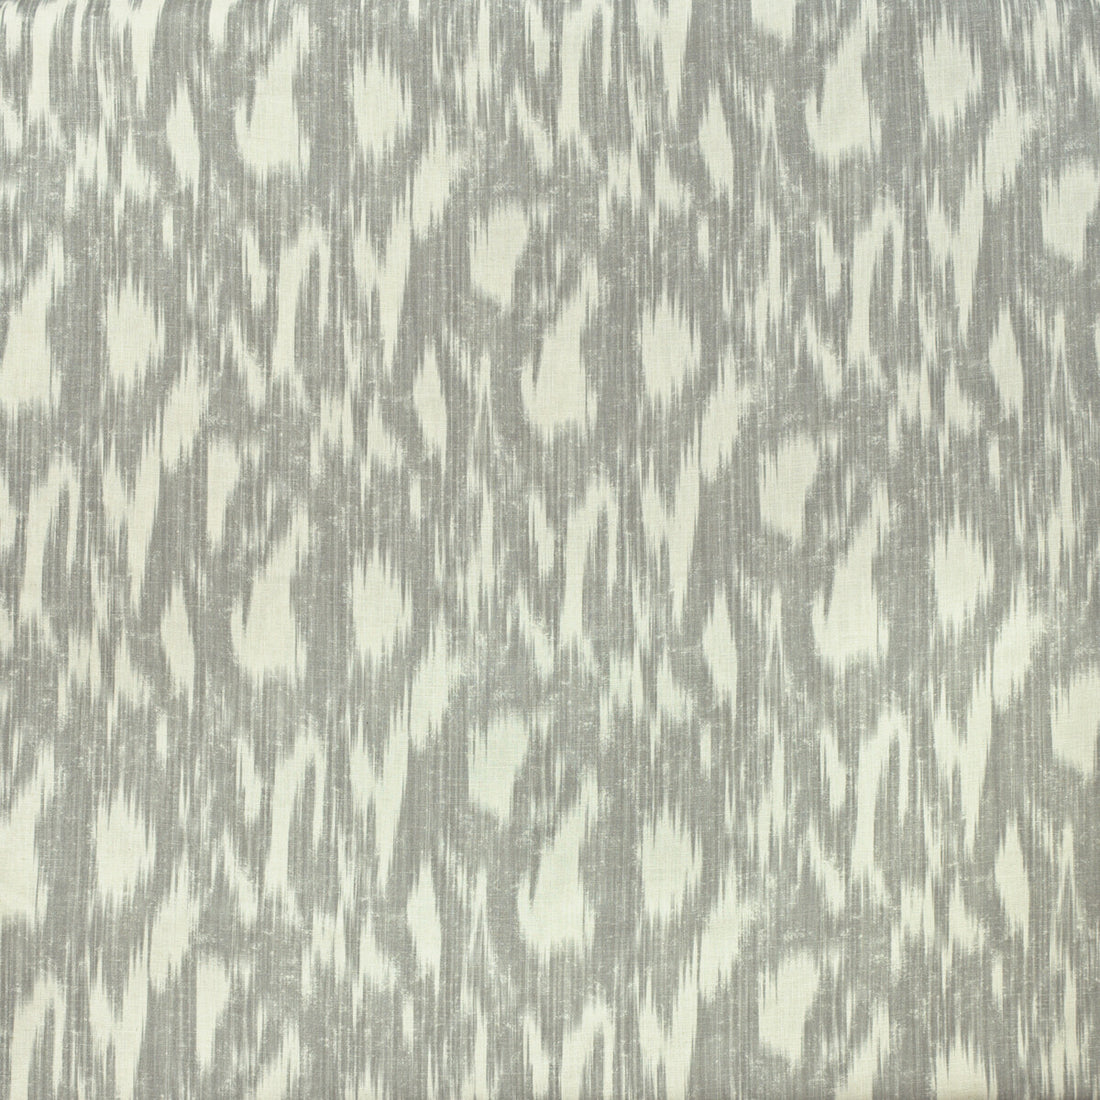 Apulia fabric in storm color - pattern AM100324.11.0 - by Kravet Couture in the Andrew Martin Salento collection